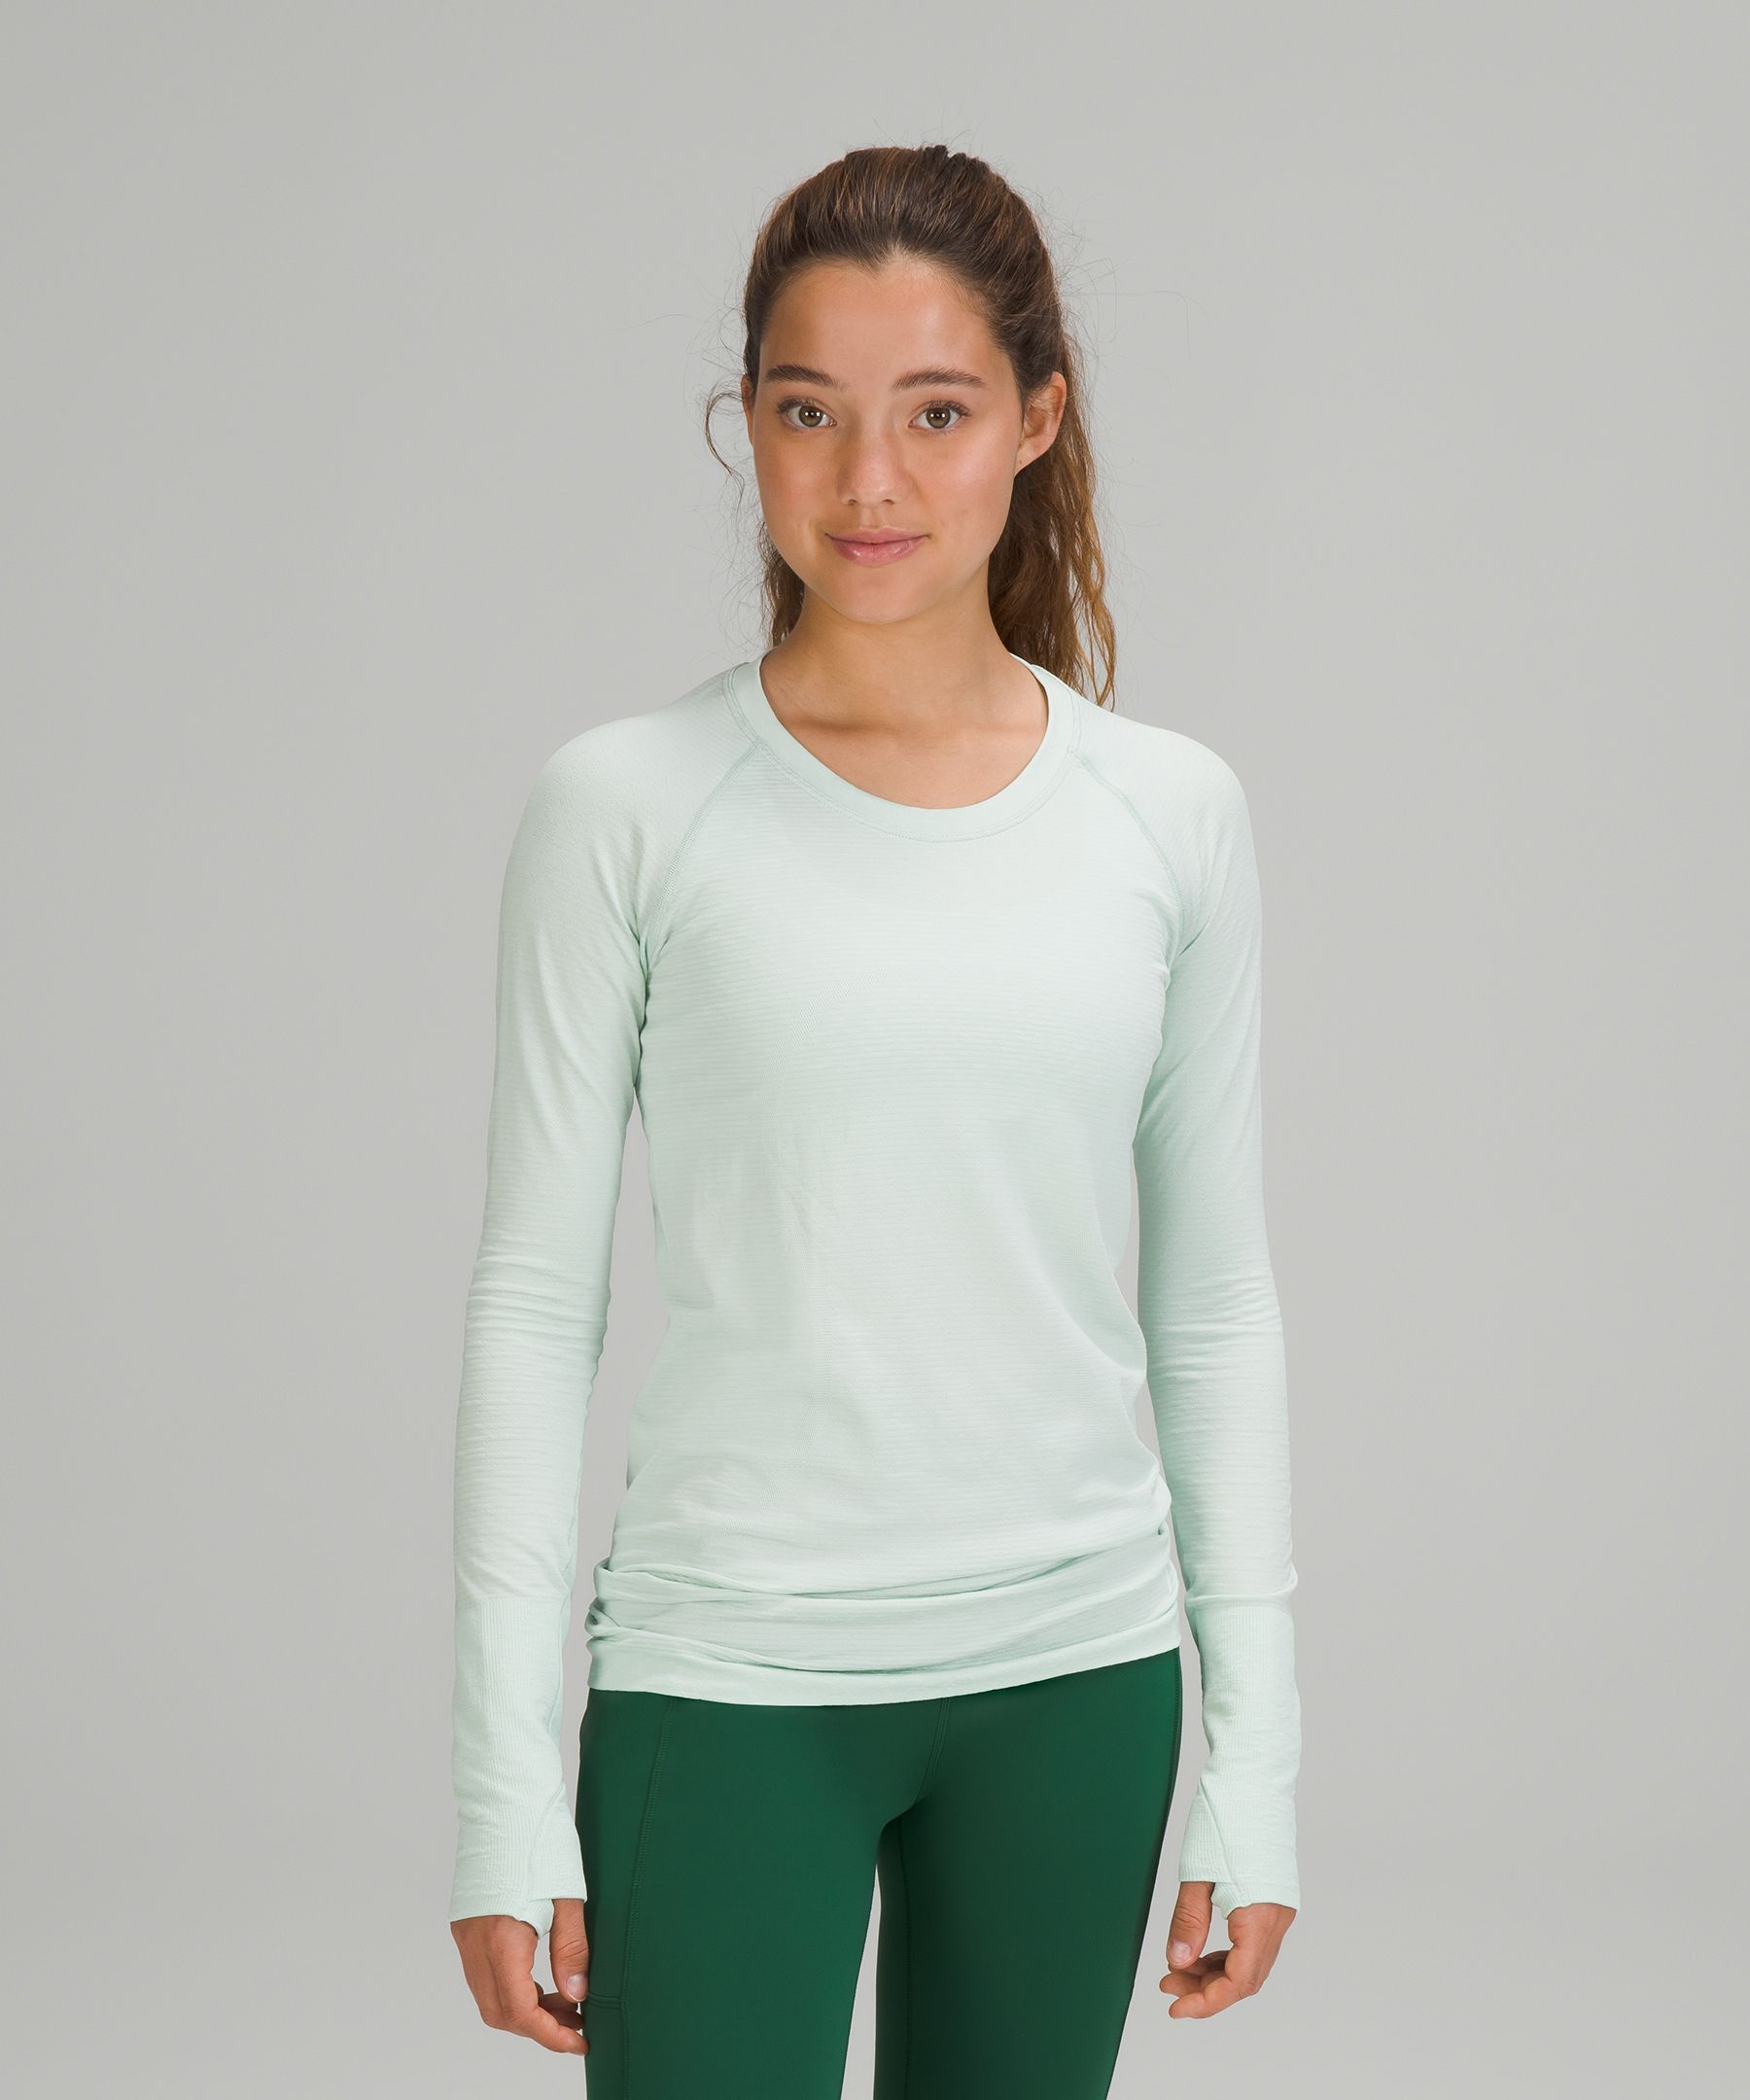 Lululemon Swiftly Tech Long Sleeve Shirt 2.0 In Distorted Static Delicate Mint/white